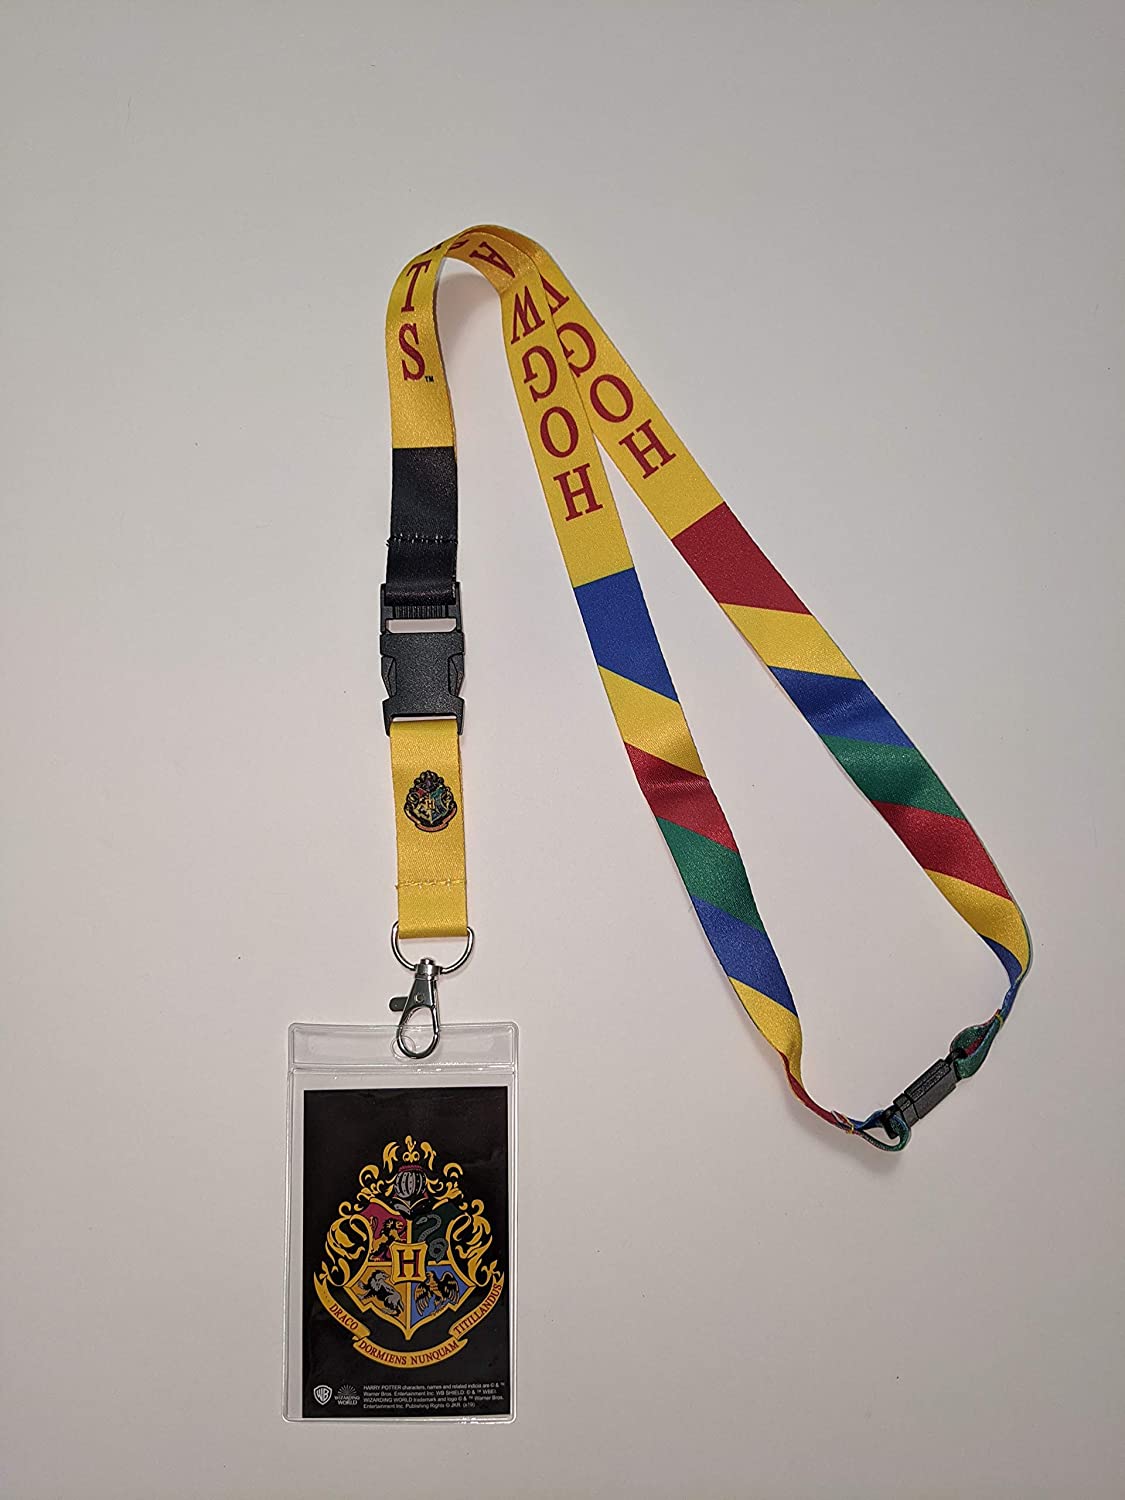 Harry Potter Hogwarts ID Card Holder With Lanyard